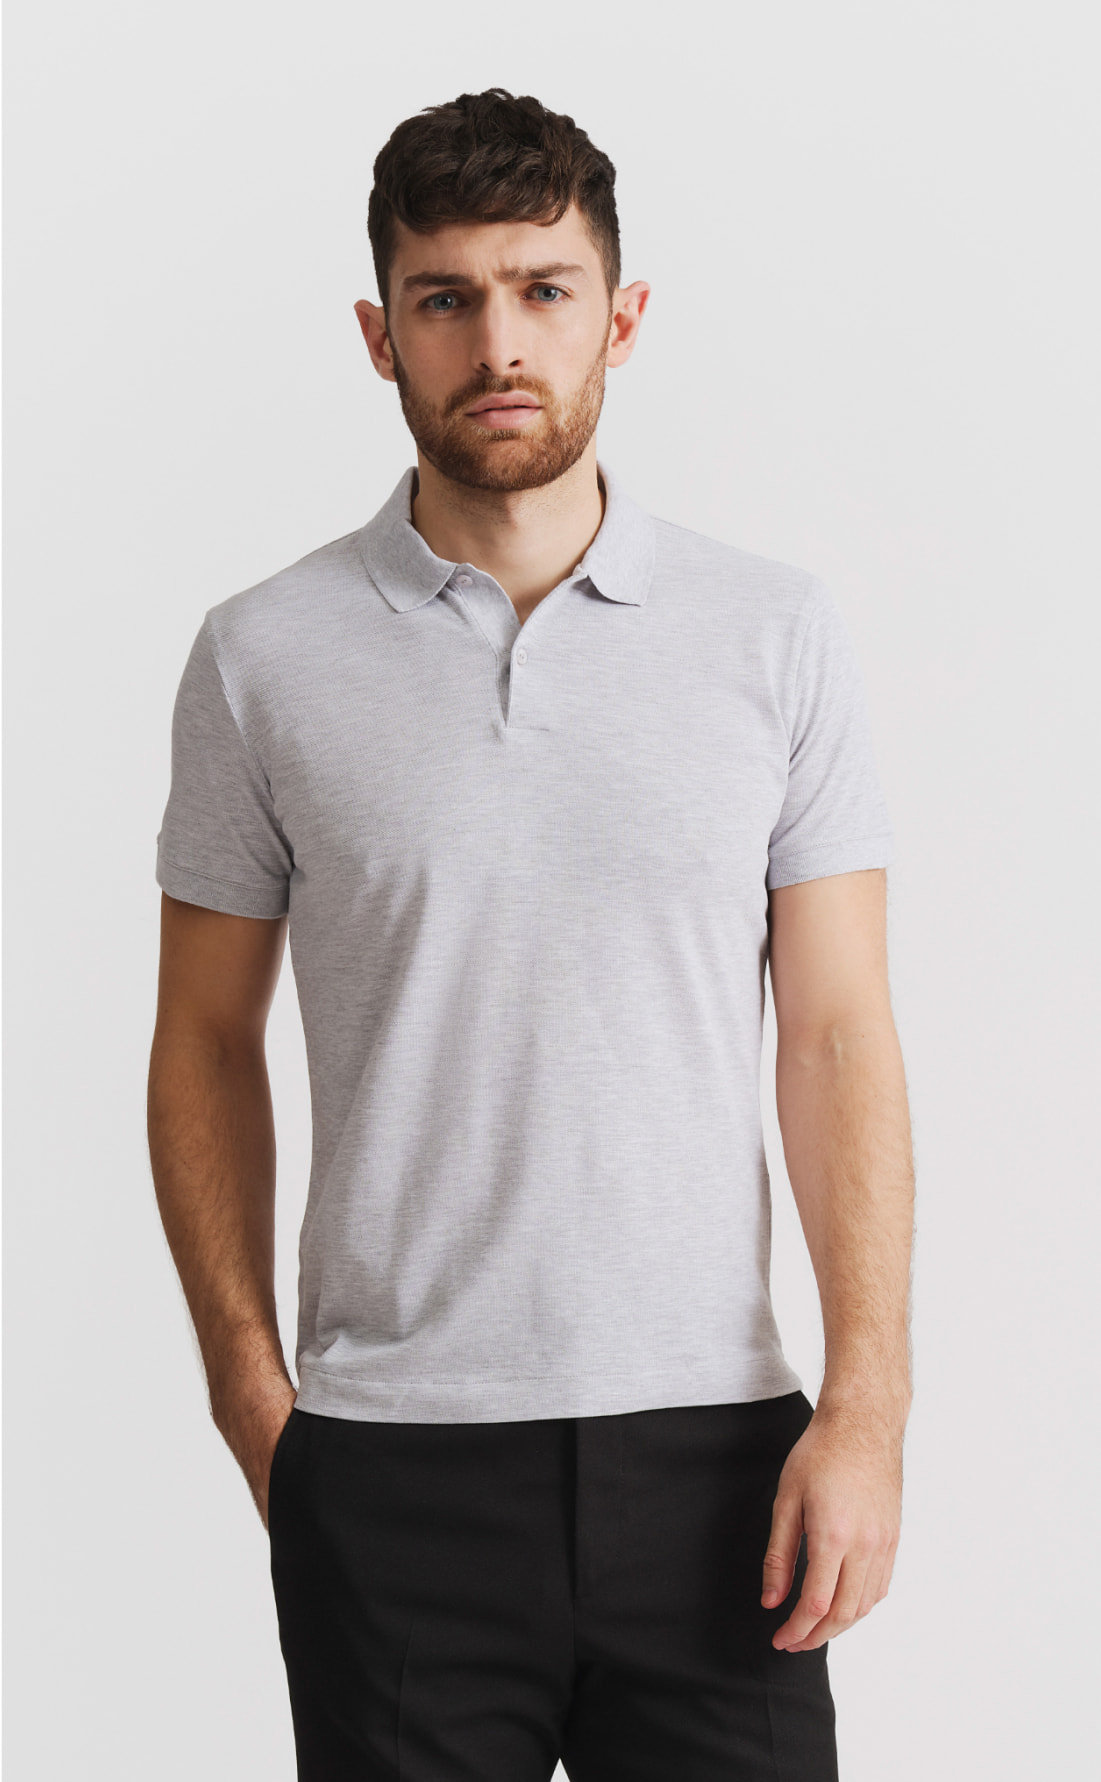 Polos/Henleys | Son of Tailor - Made to order. Zero Inventory Waste.